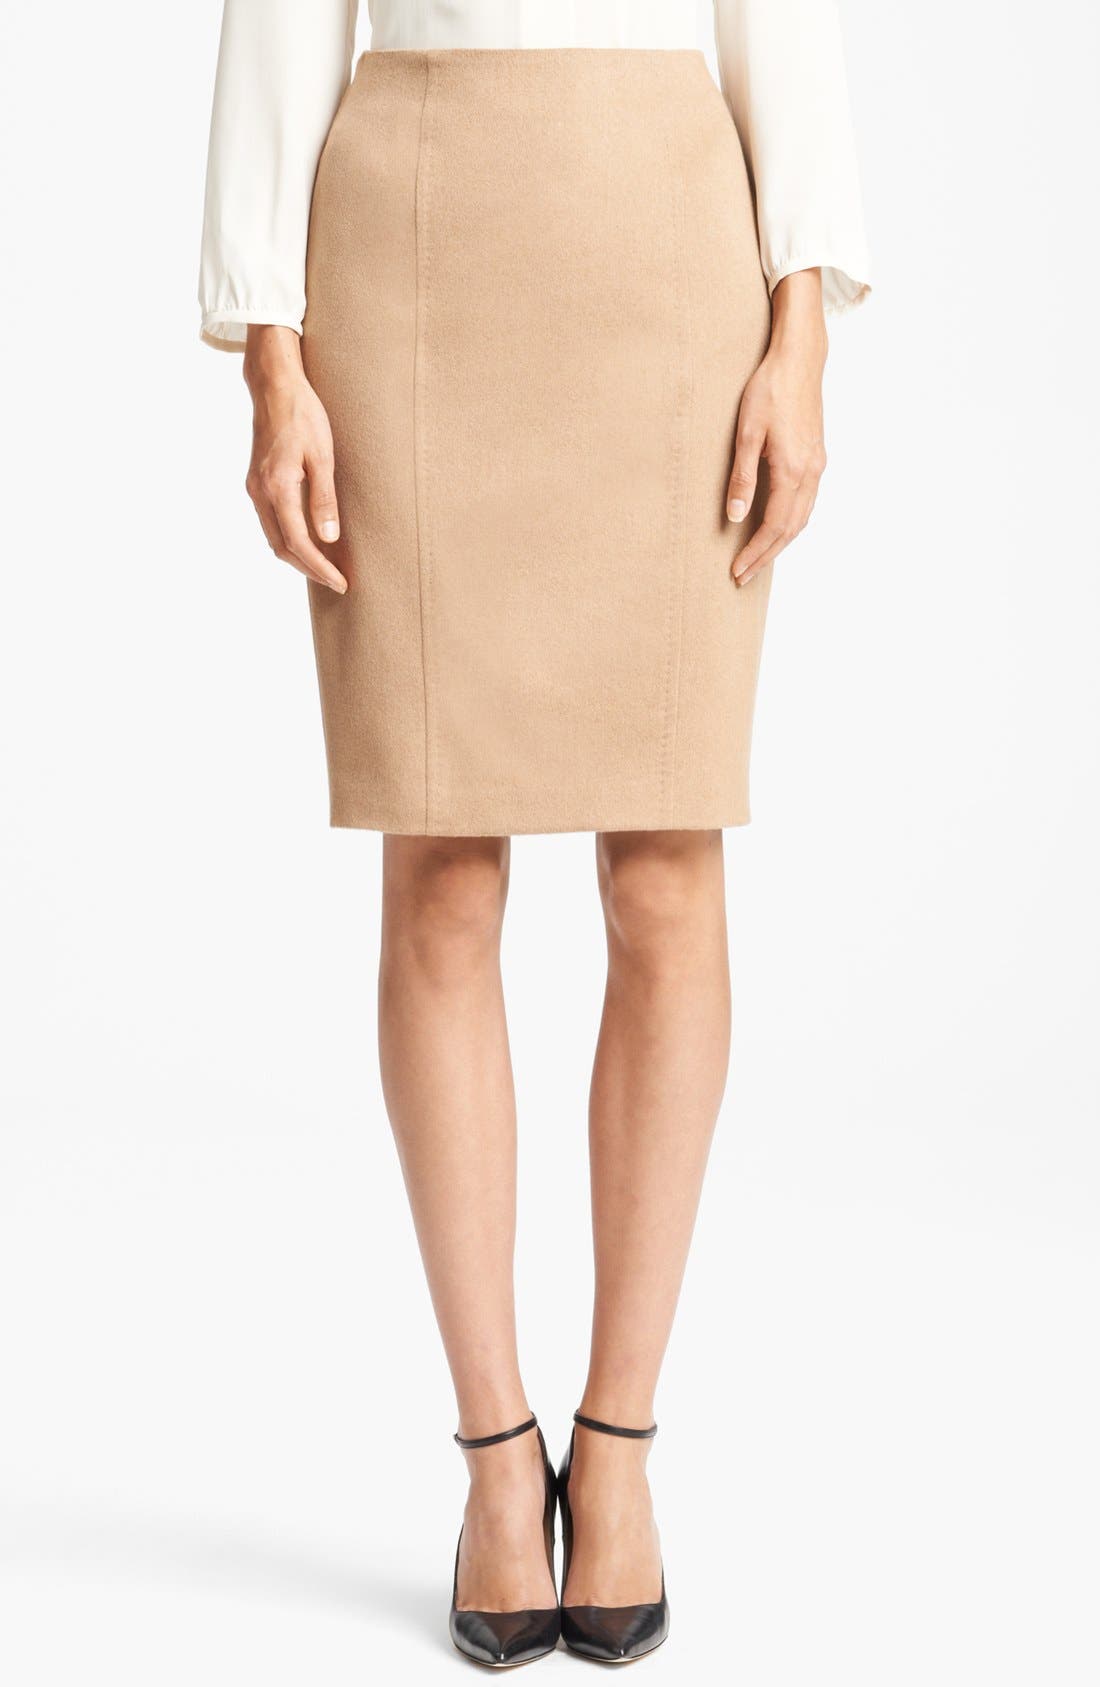 camel colored pencil skirt